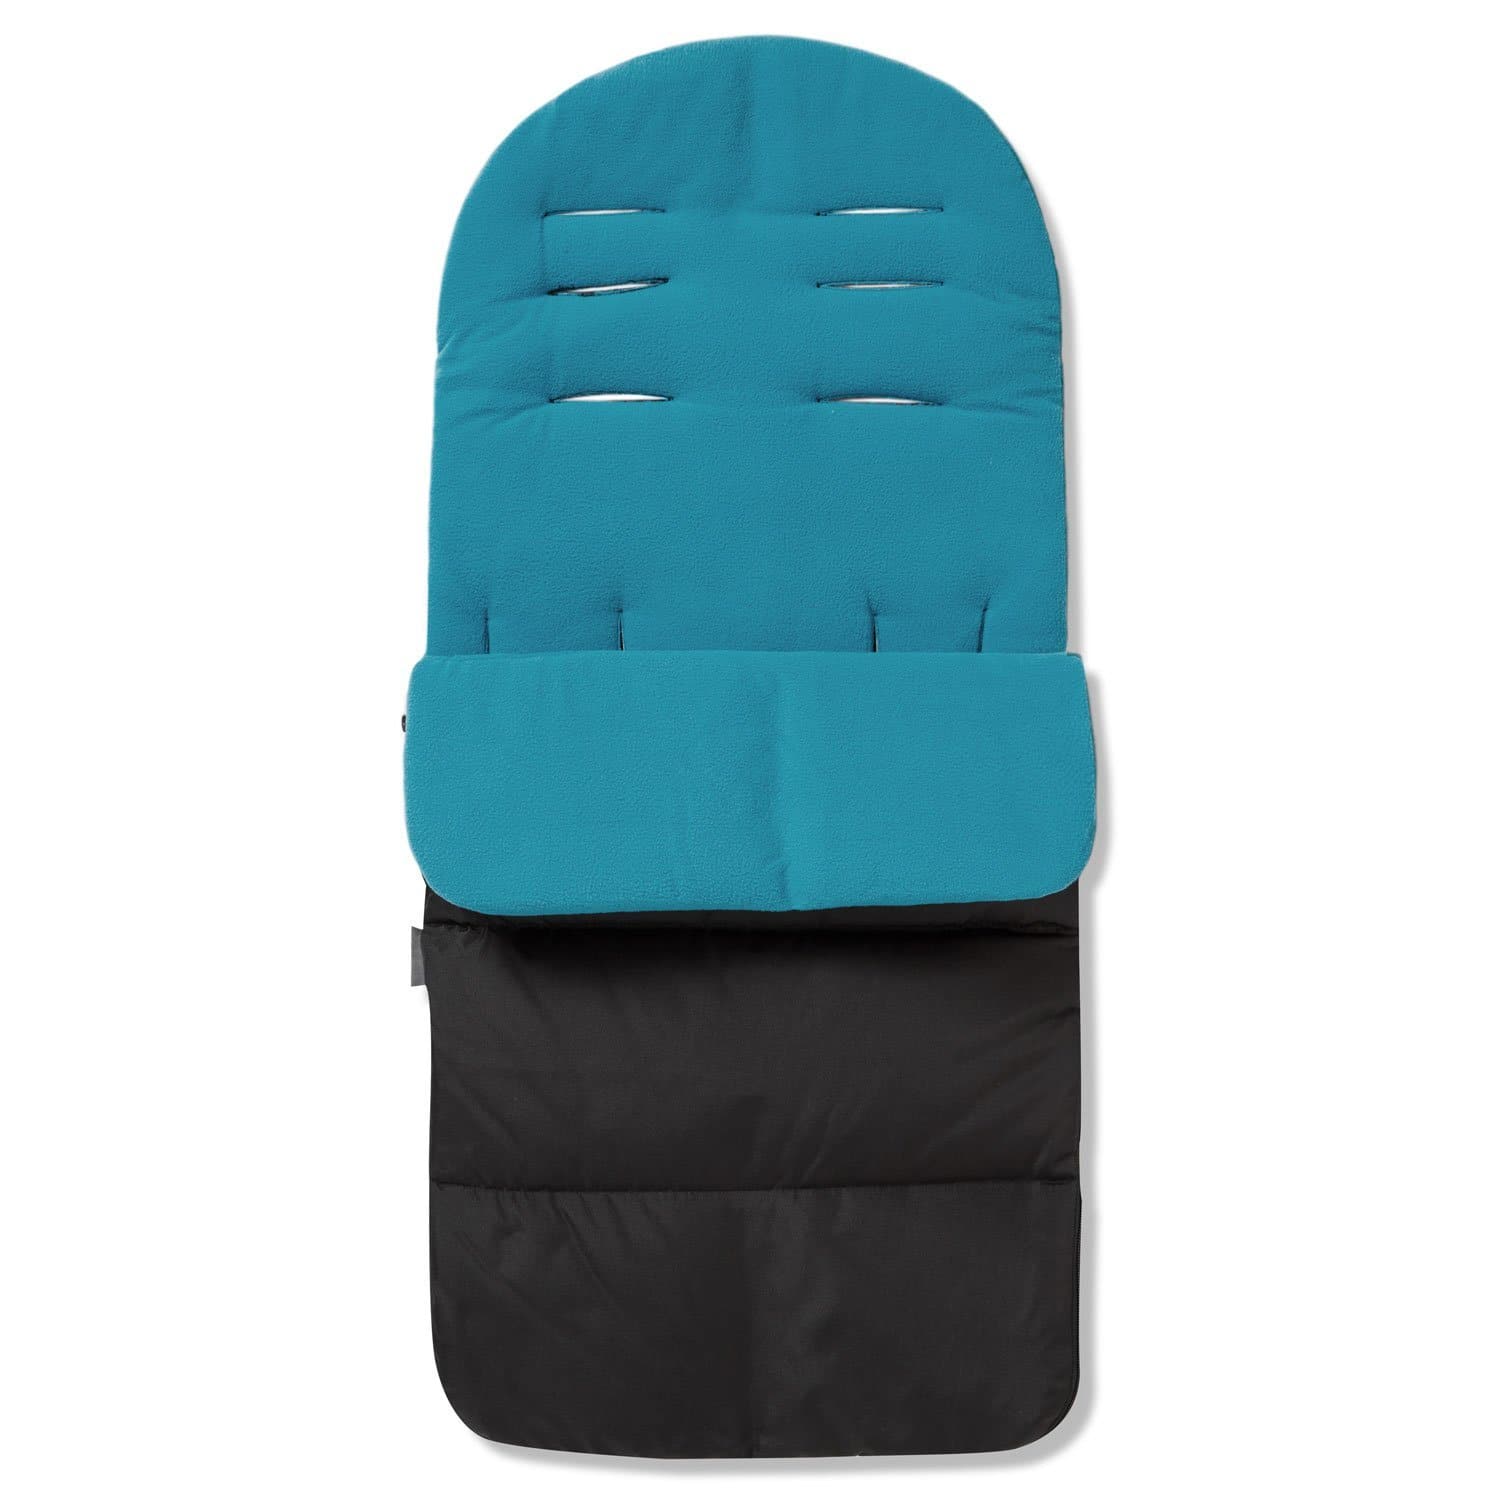 Premium Footmuff / Cosy Toes Compatible with Zeta - Ocean Blue / Fits All Models | For Your Little One